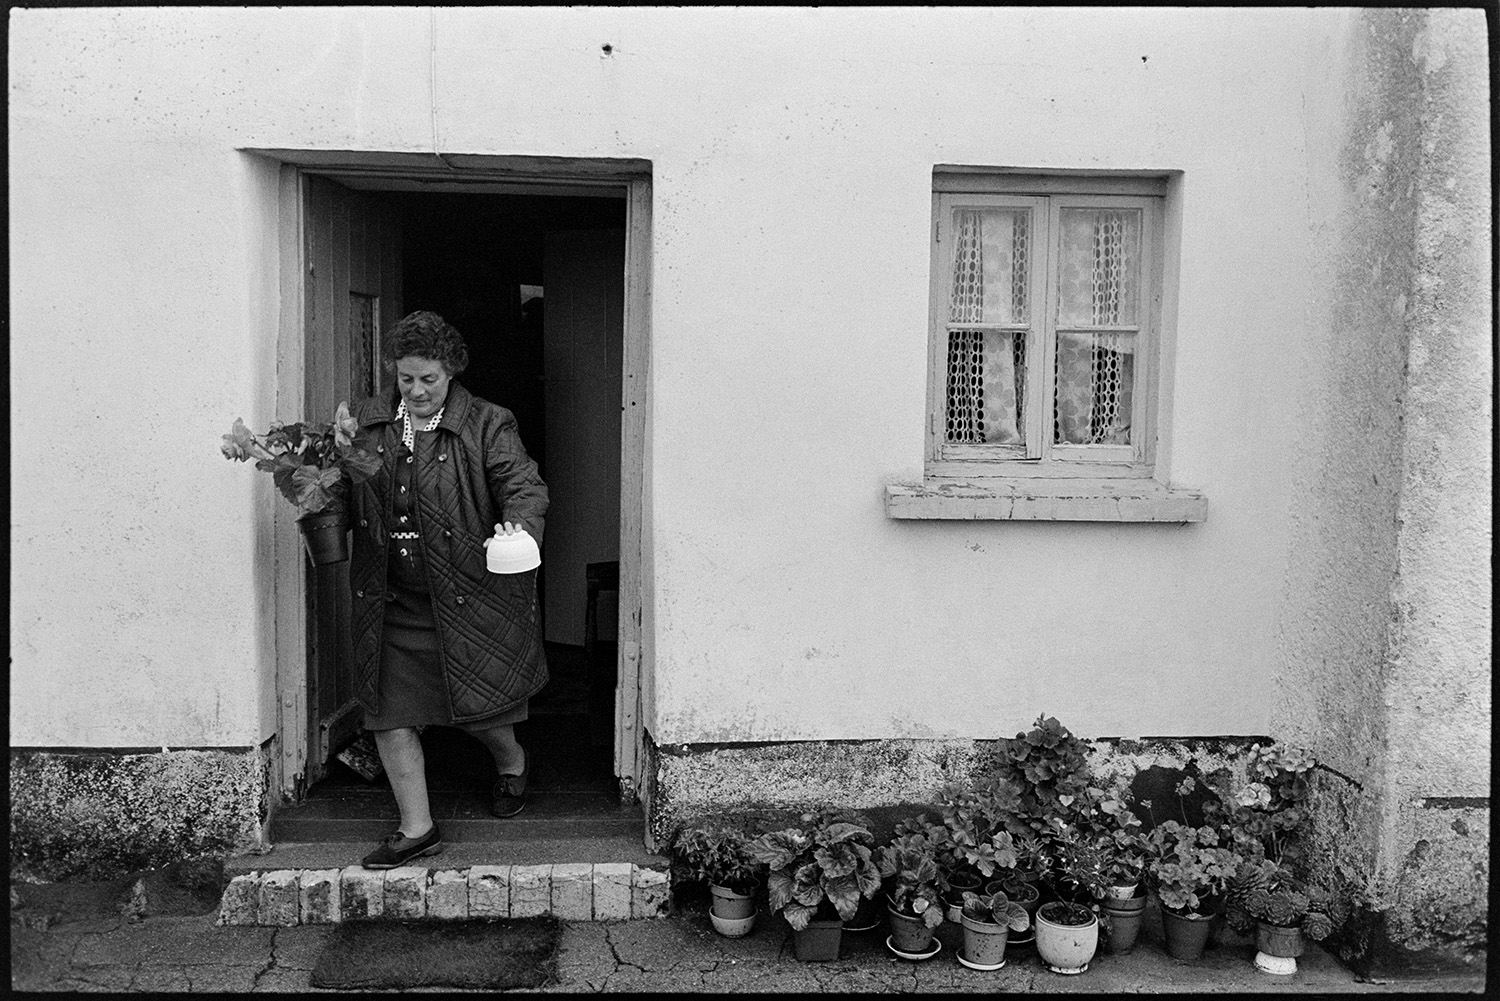 Taking flower arrangement of wild flowers to show. 
[Mrs Piper leaving her cottage at Upcott, Dolton holding a plant which she is taking to Dolton Flower Show. More pot plants are arranged by the doorstep.]